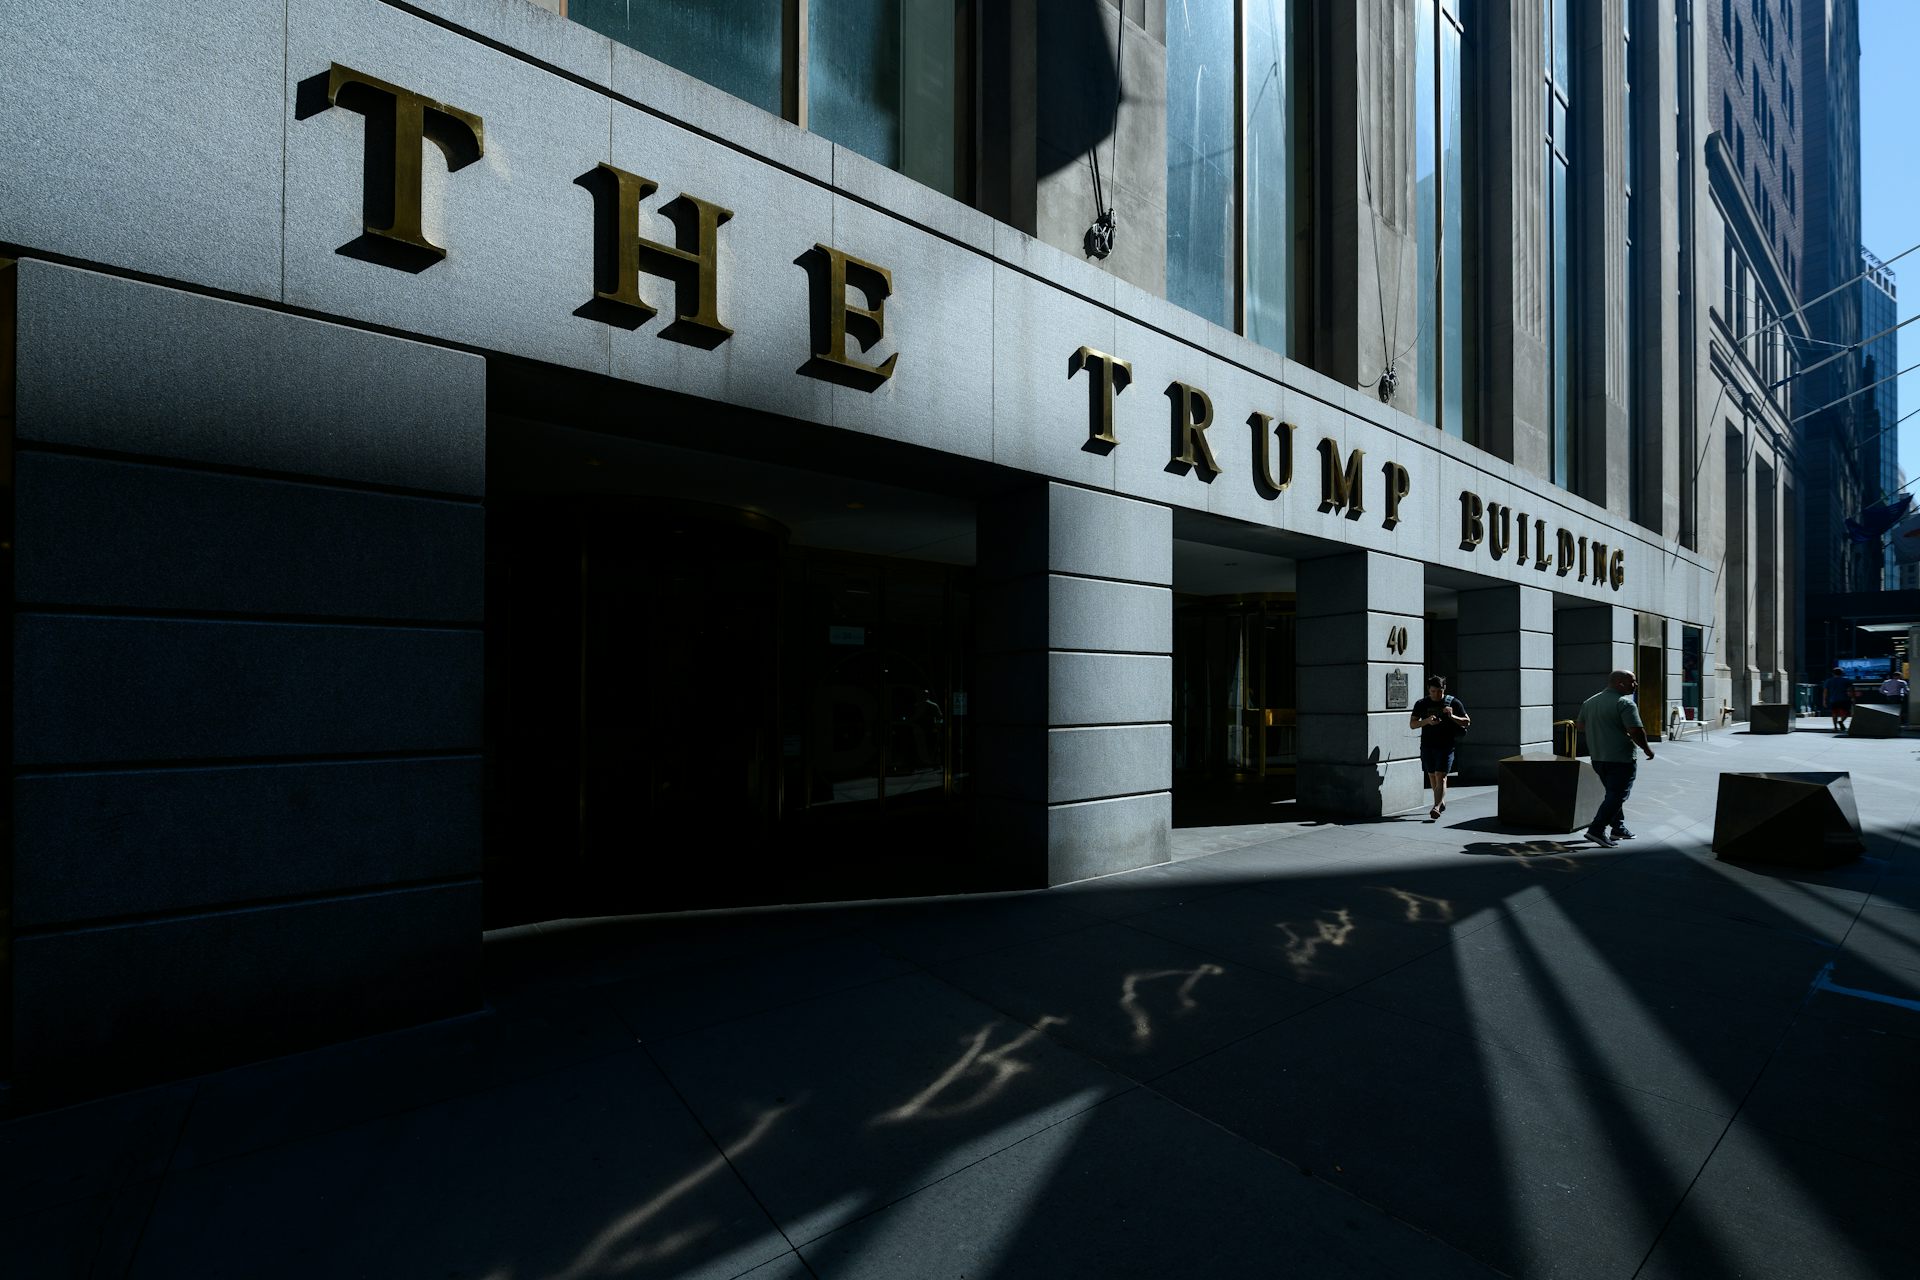 40 Wall Street is one of the Trump Organization properties included in the lawsuit.